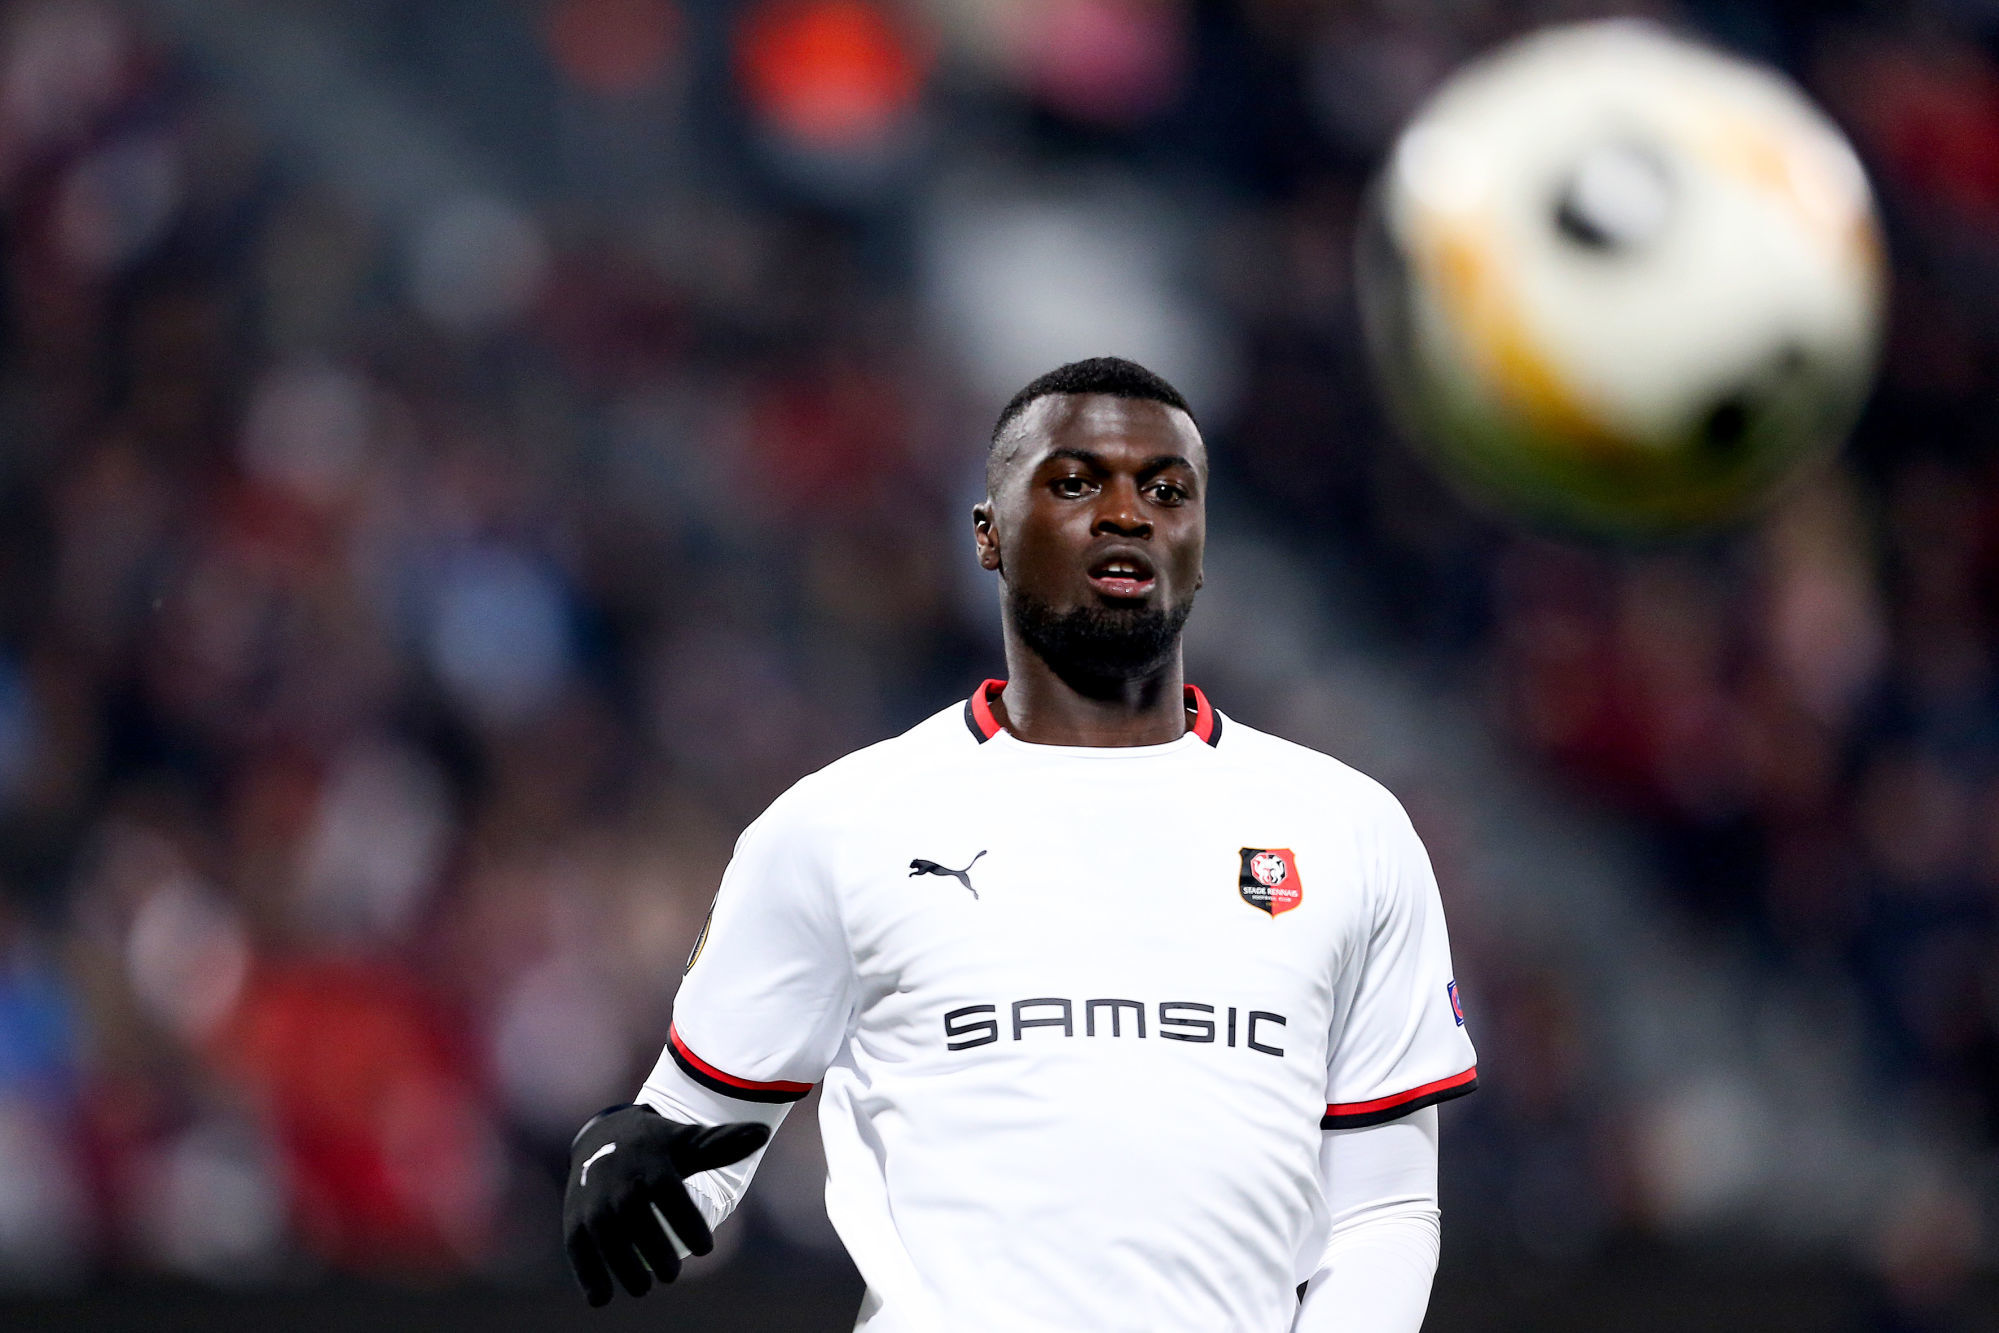 M'Baye Niang of Rennes () during the Europa League match between Cluj and Rennes on 7th November 2019.
Photo : Mircea Rosca / Icon Sport